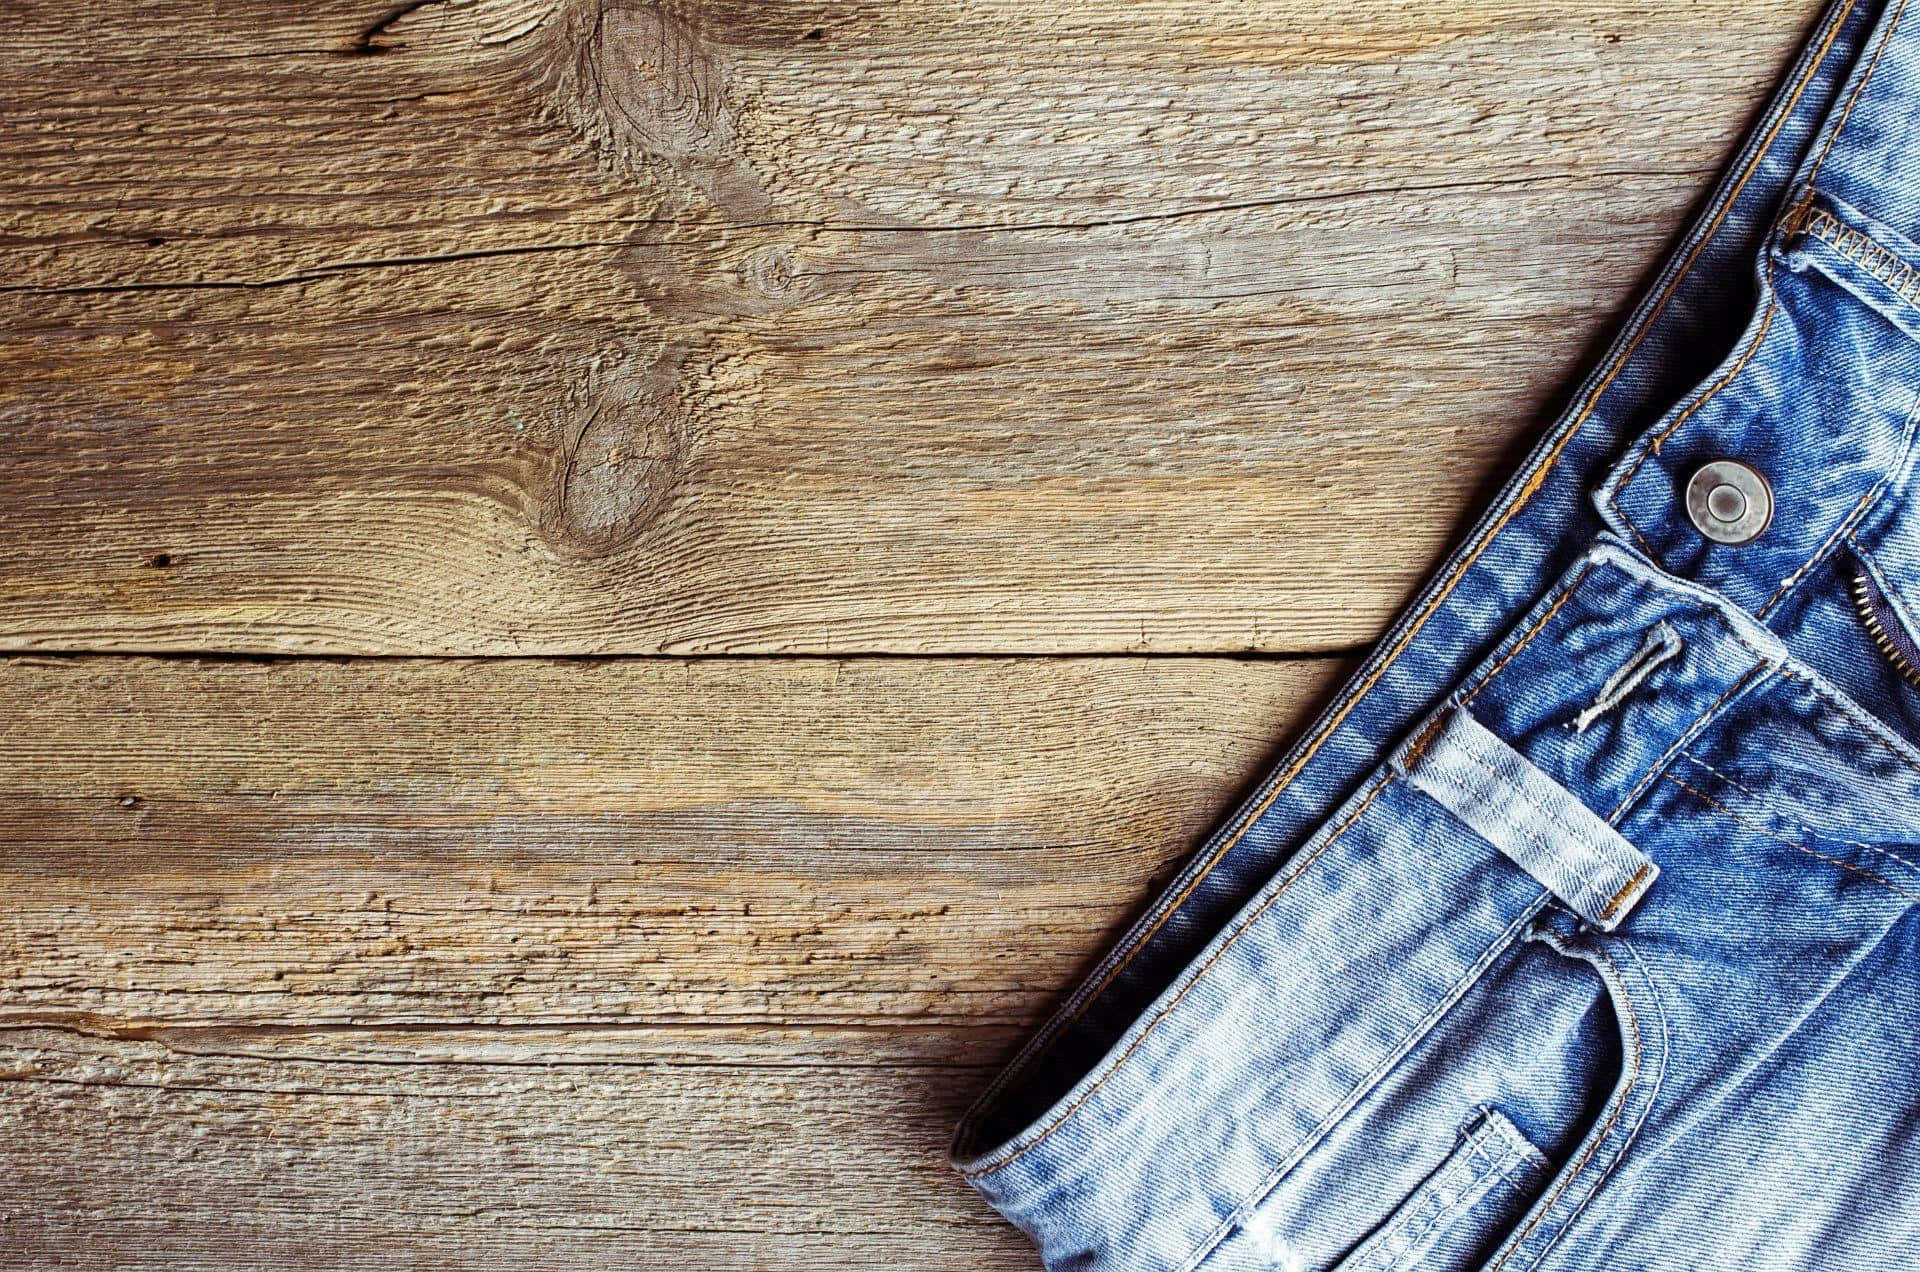 Denim Texture Images | Free Photos, PNG Stickers, Wallpapers & Backgrounds  - rawpixel